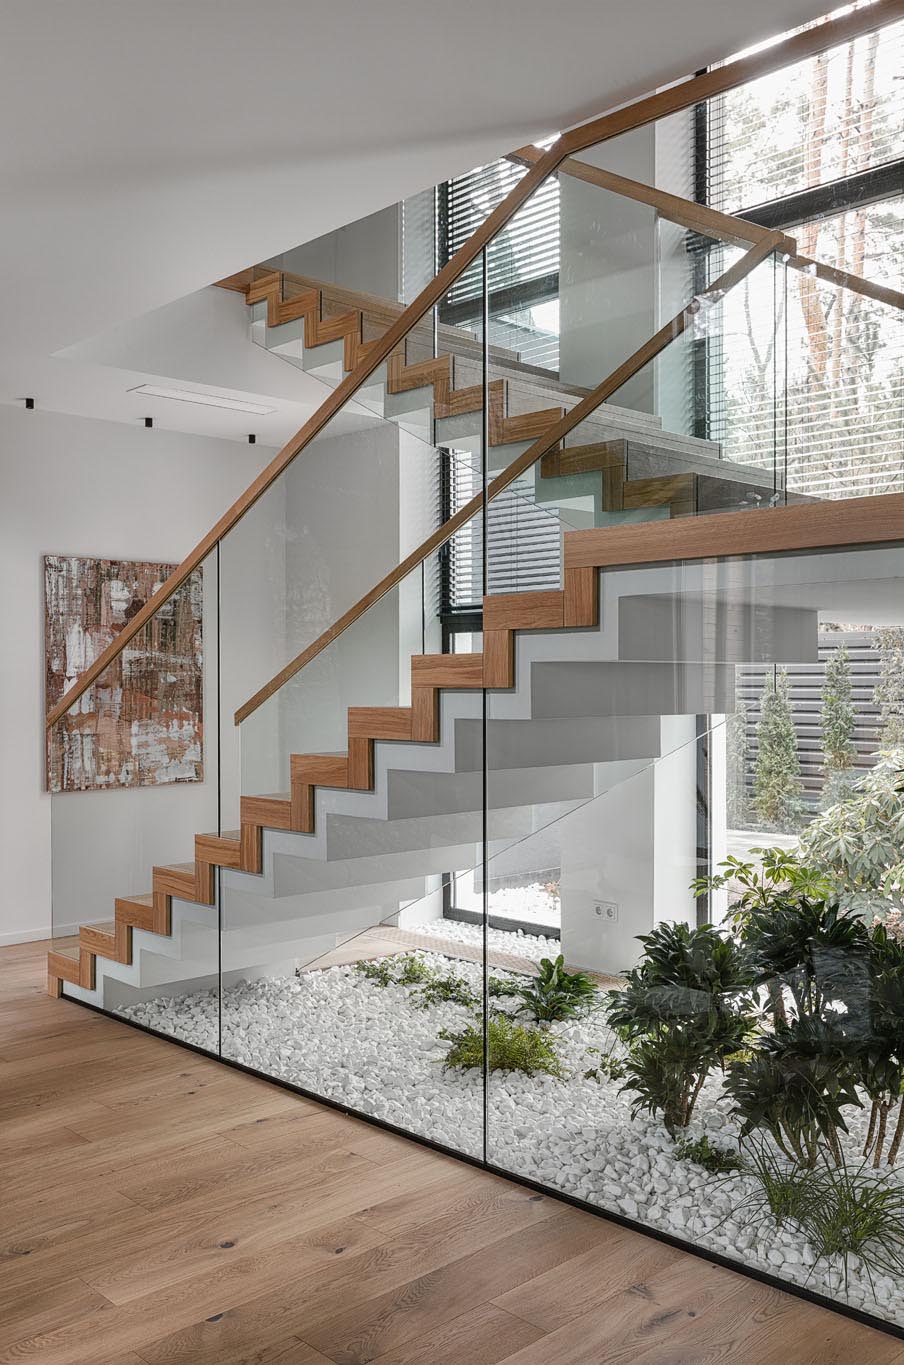 These modern stairs that connect the various levels of the home are made of concrete, wood, and glass. Underneath the stairs, live indoor plants and rocks have been used to create a small garden, bringing the outdoors in.